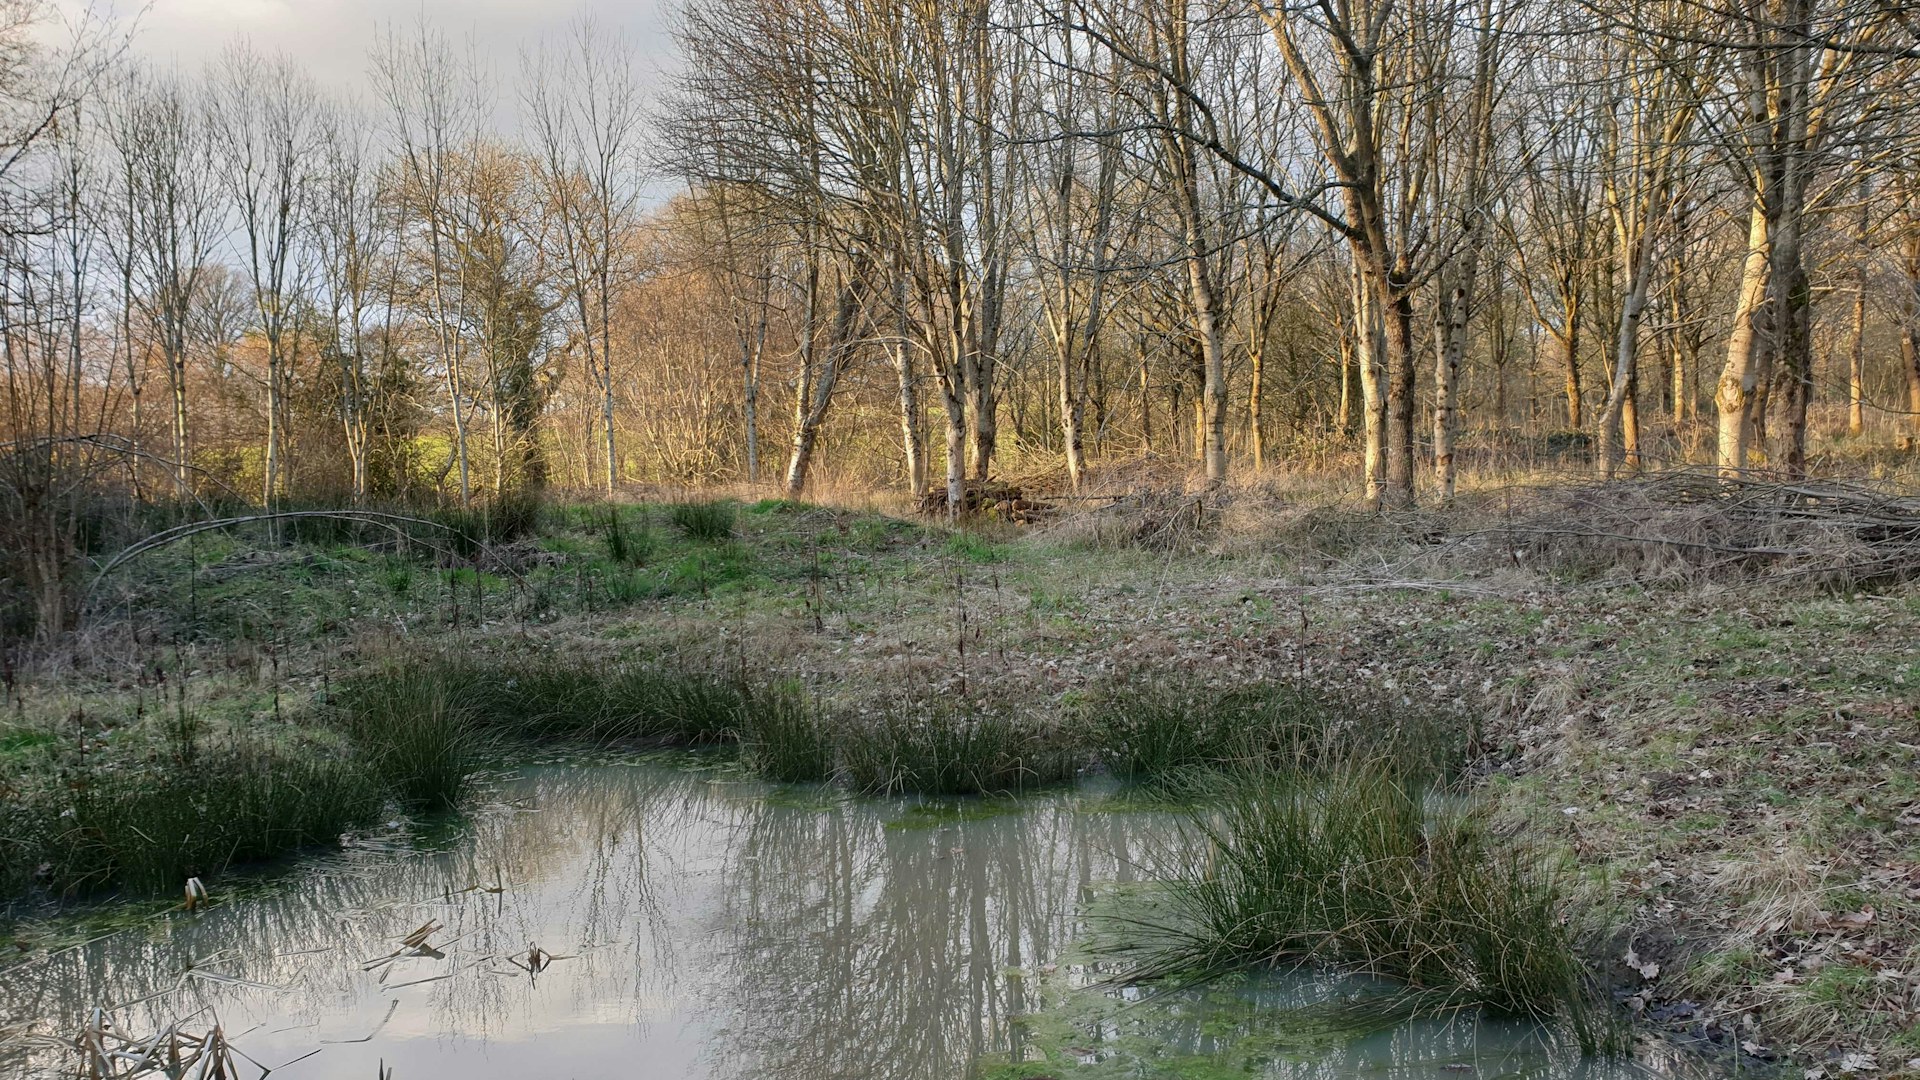 Natural pond in winter, Underhill Wood Nature Reserve